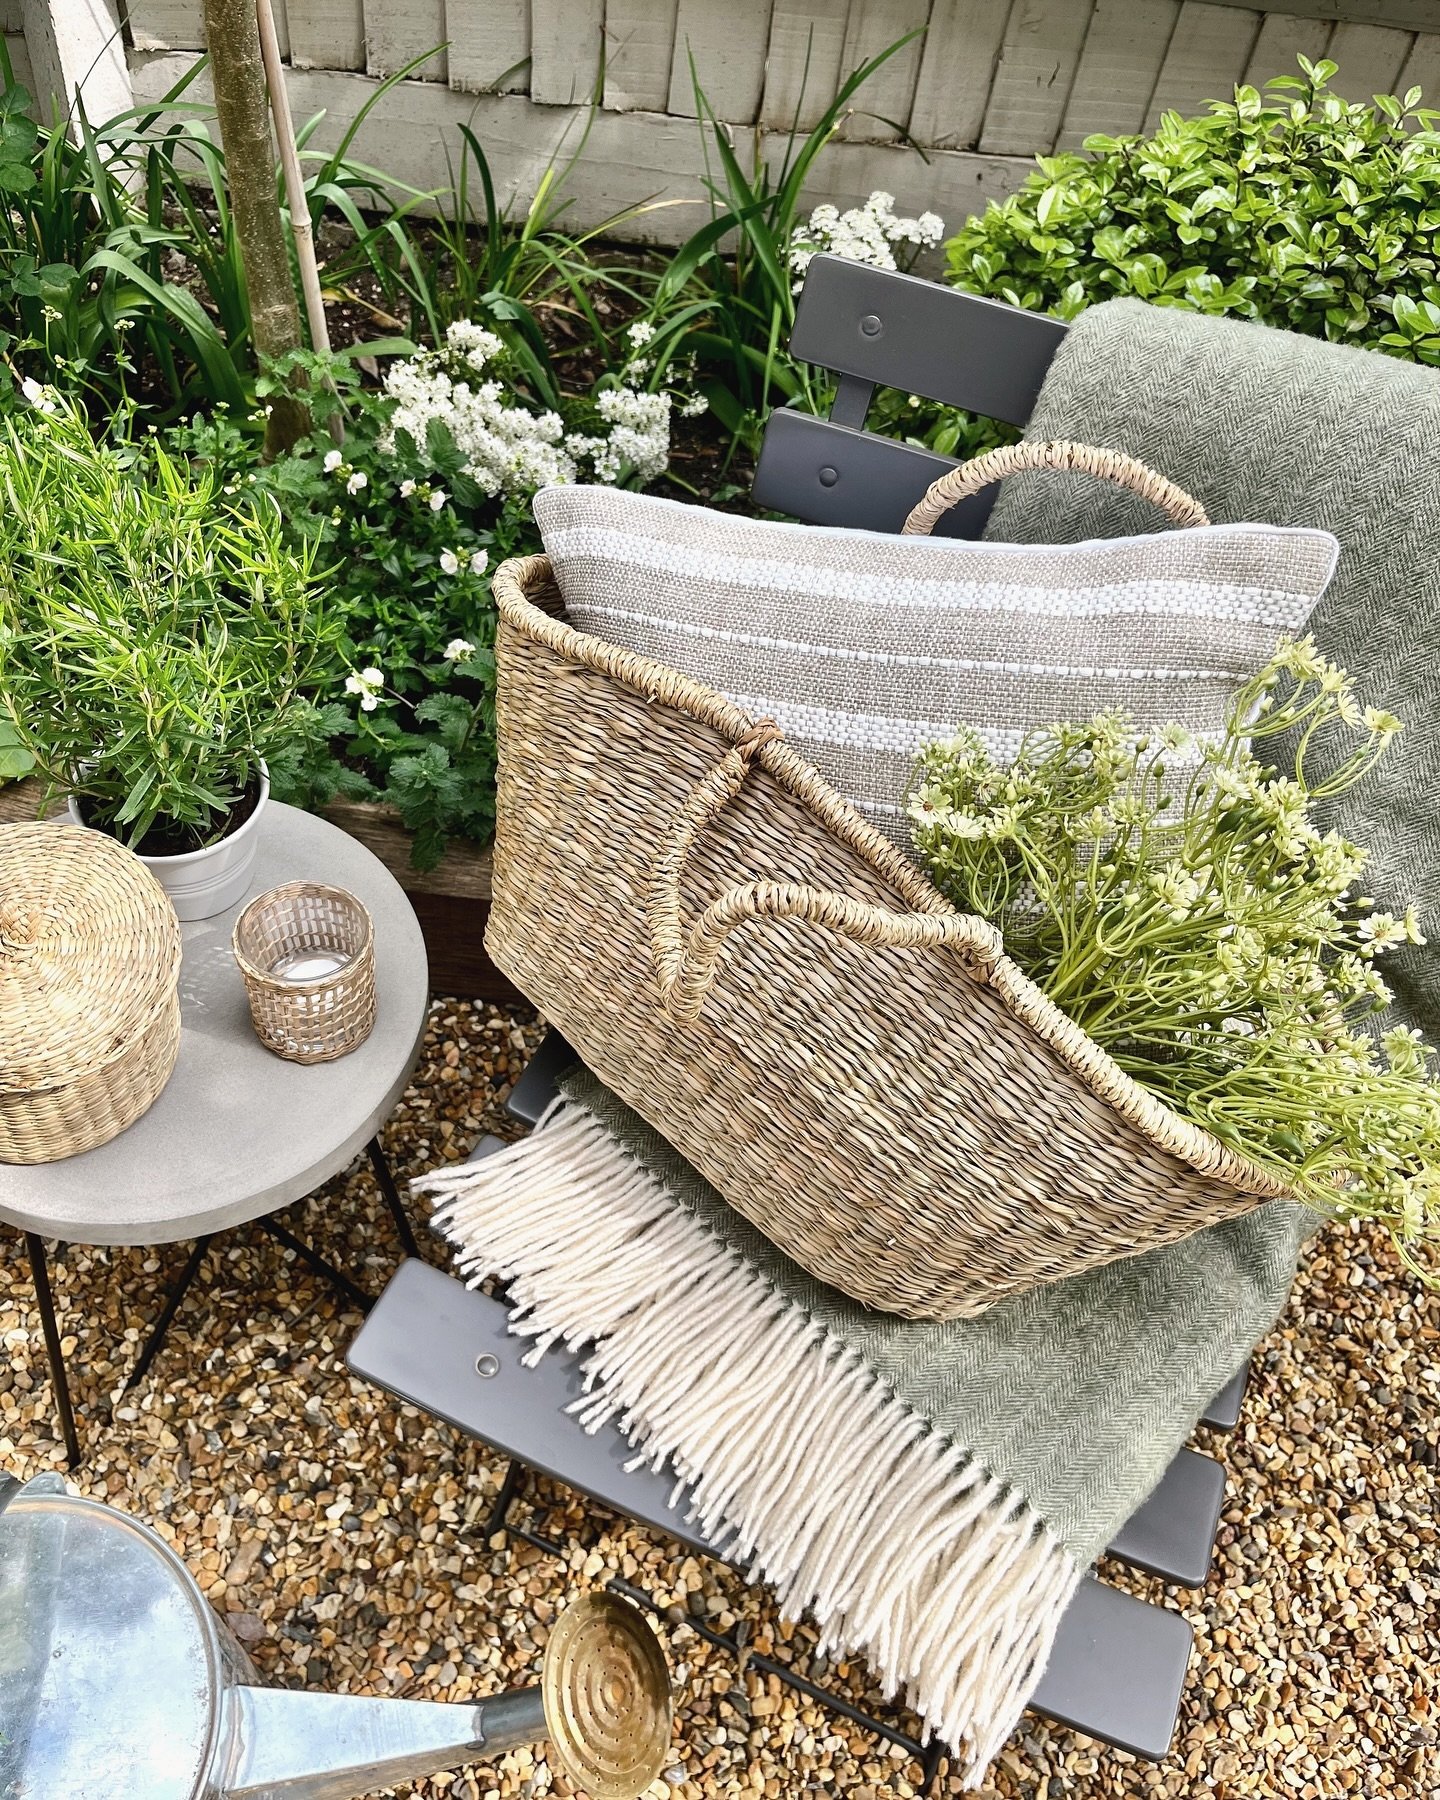 With spring finally making an appearance we are putting a spotlight on our seagrass range.. A great time of year to introduce some rustic seagrass into your home &amp; garden. We have a whole range of beautifully handwoven pieces, head over to our st